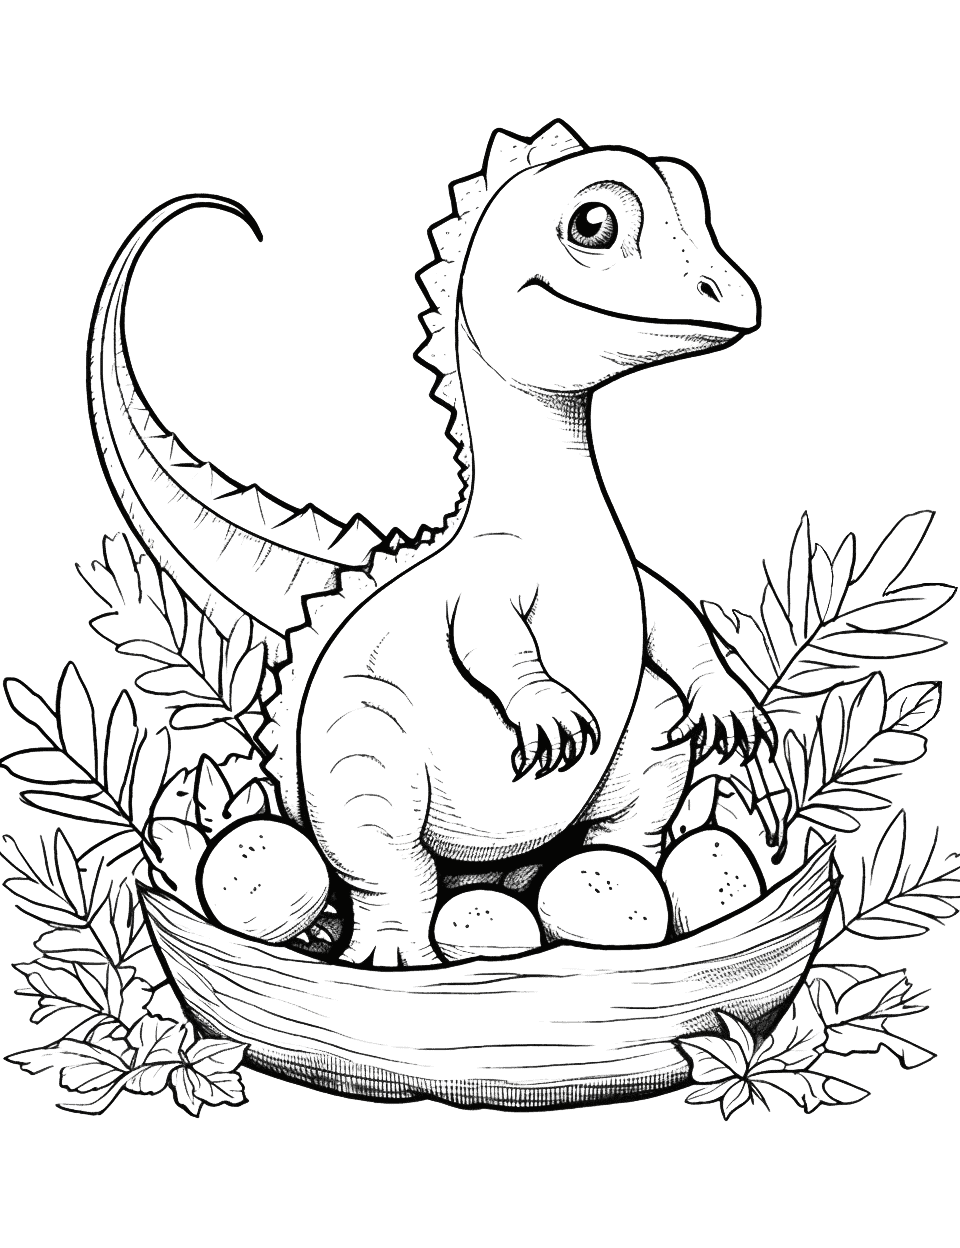 Baby Dinosaur and Eggs Coloring Page - A baby dinosaur with a nest full of unhatched eggs awaiting its siblings.